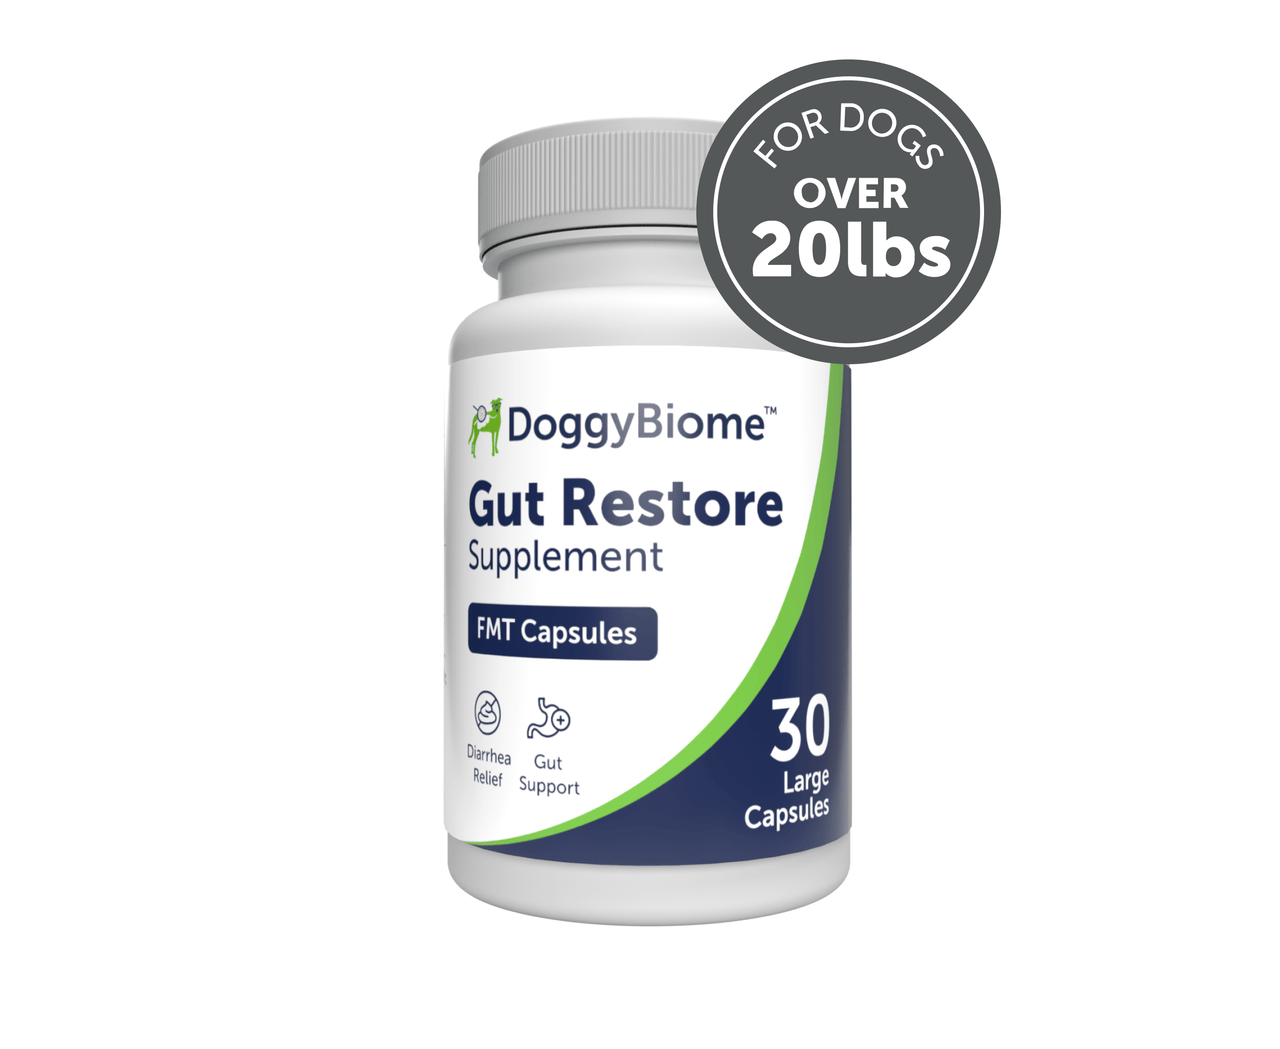 DoggyBiome™ Gut Restore Supplement from Standard Diet-Fed Dogs